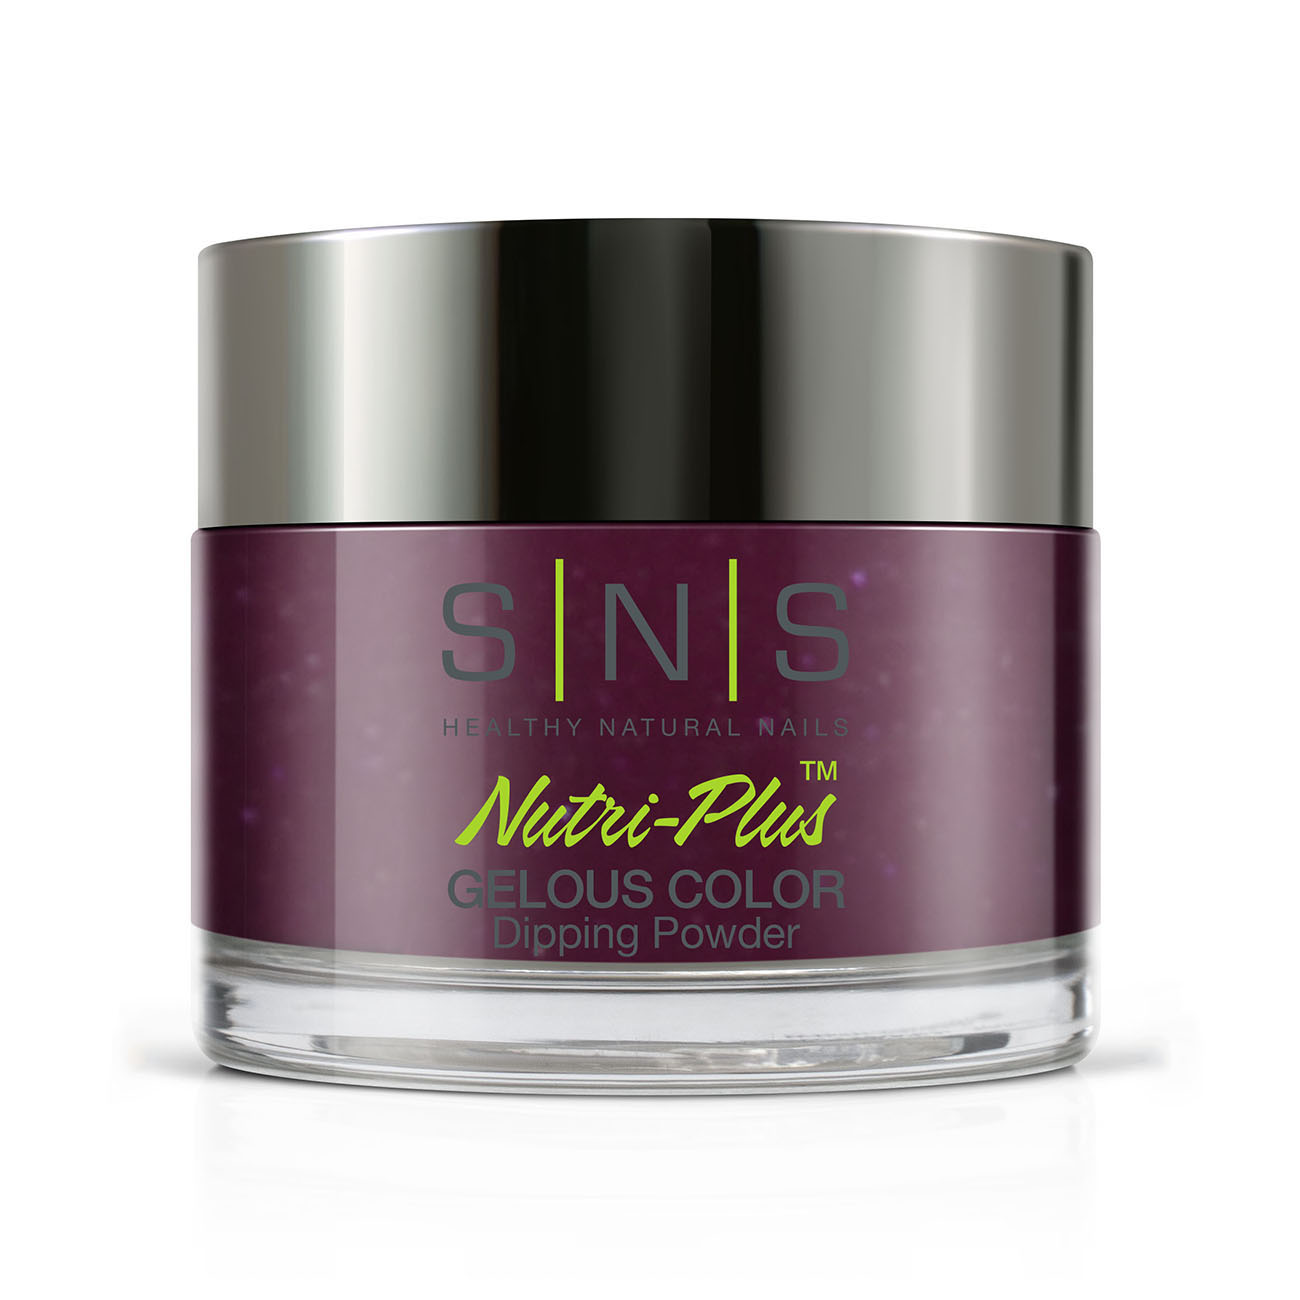 SNS Nails AC13 Catfight 28g (1oz) | Gelous Dipping Powder